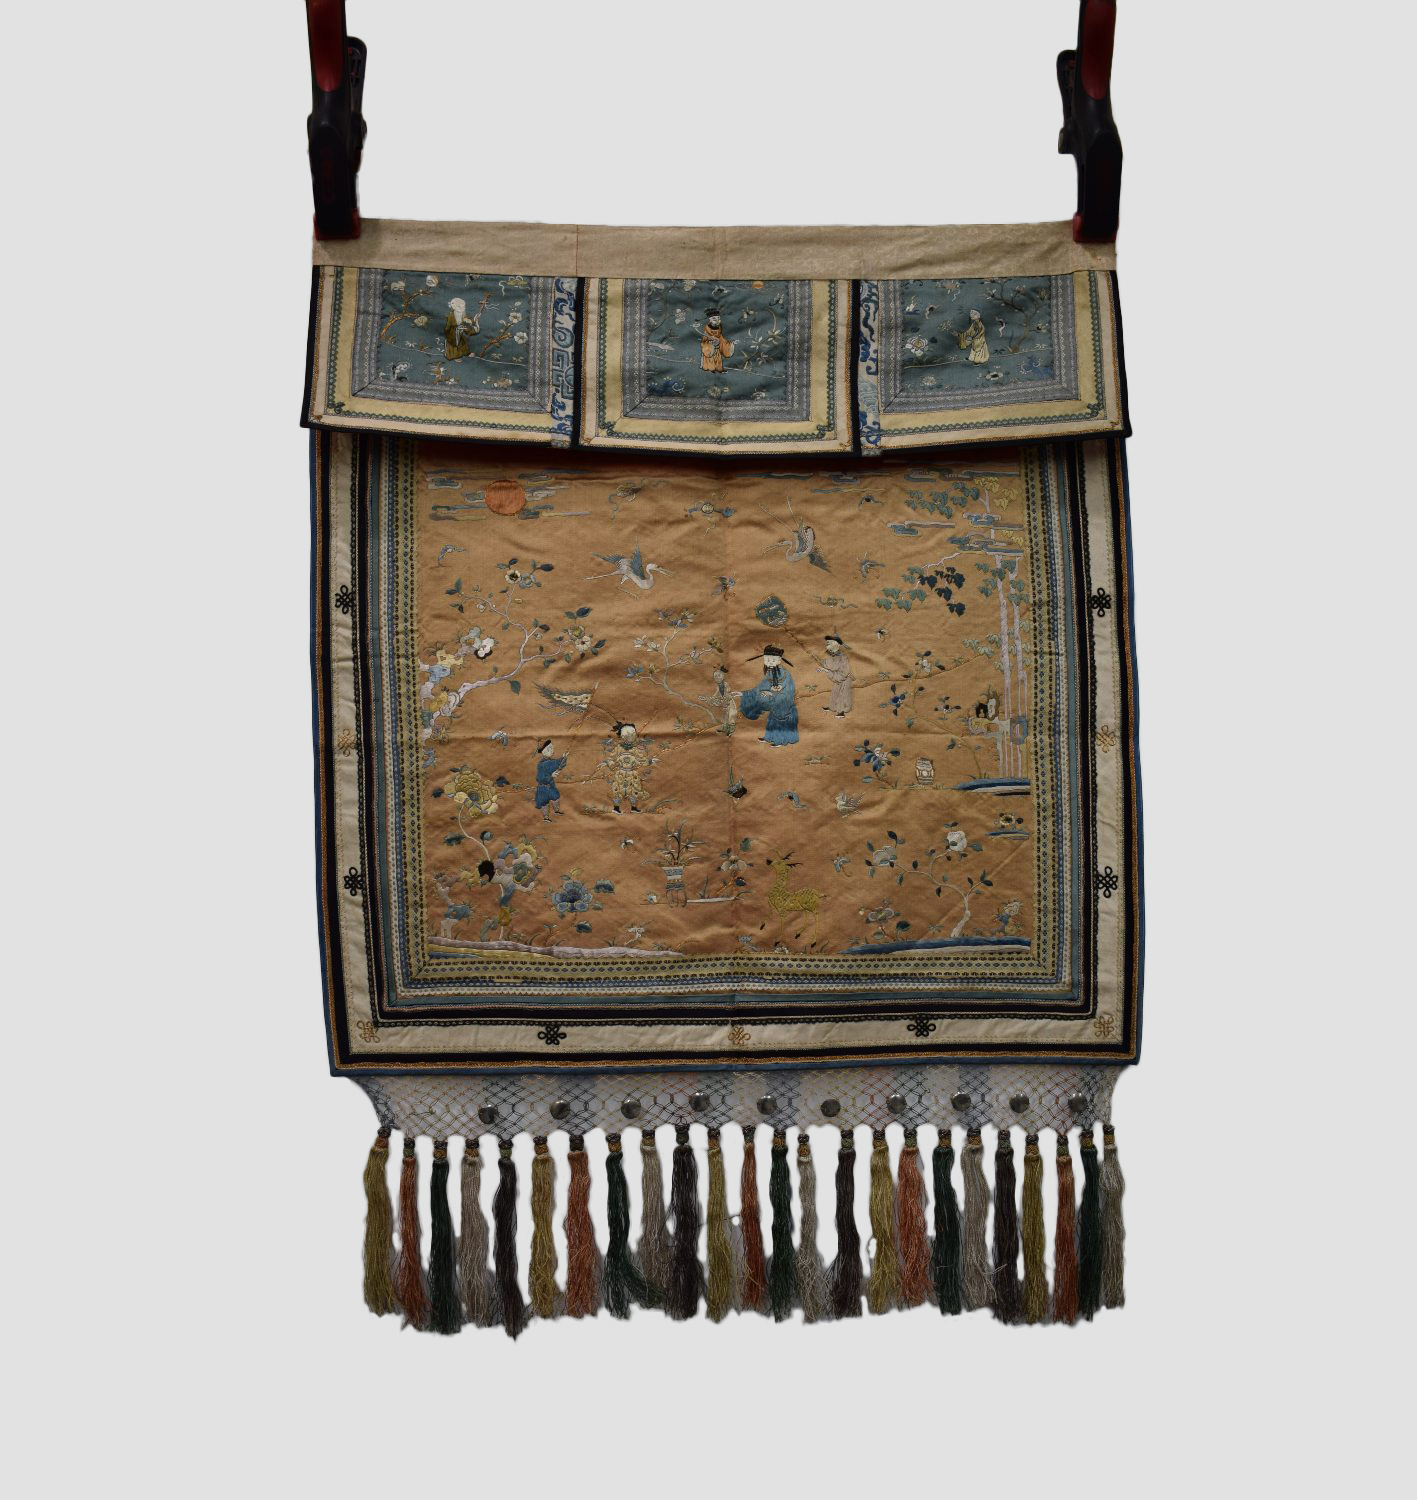 Exquisite Chinese silk embroidered altar frontal (tokwi) for a domestic altar, late 19th/early